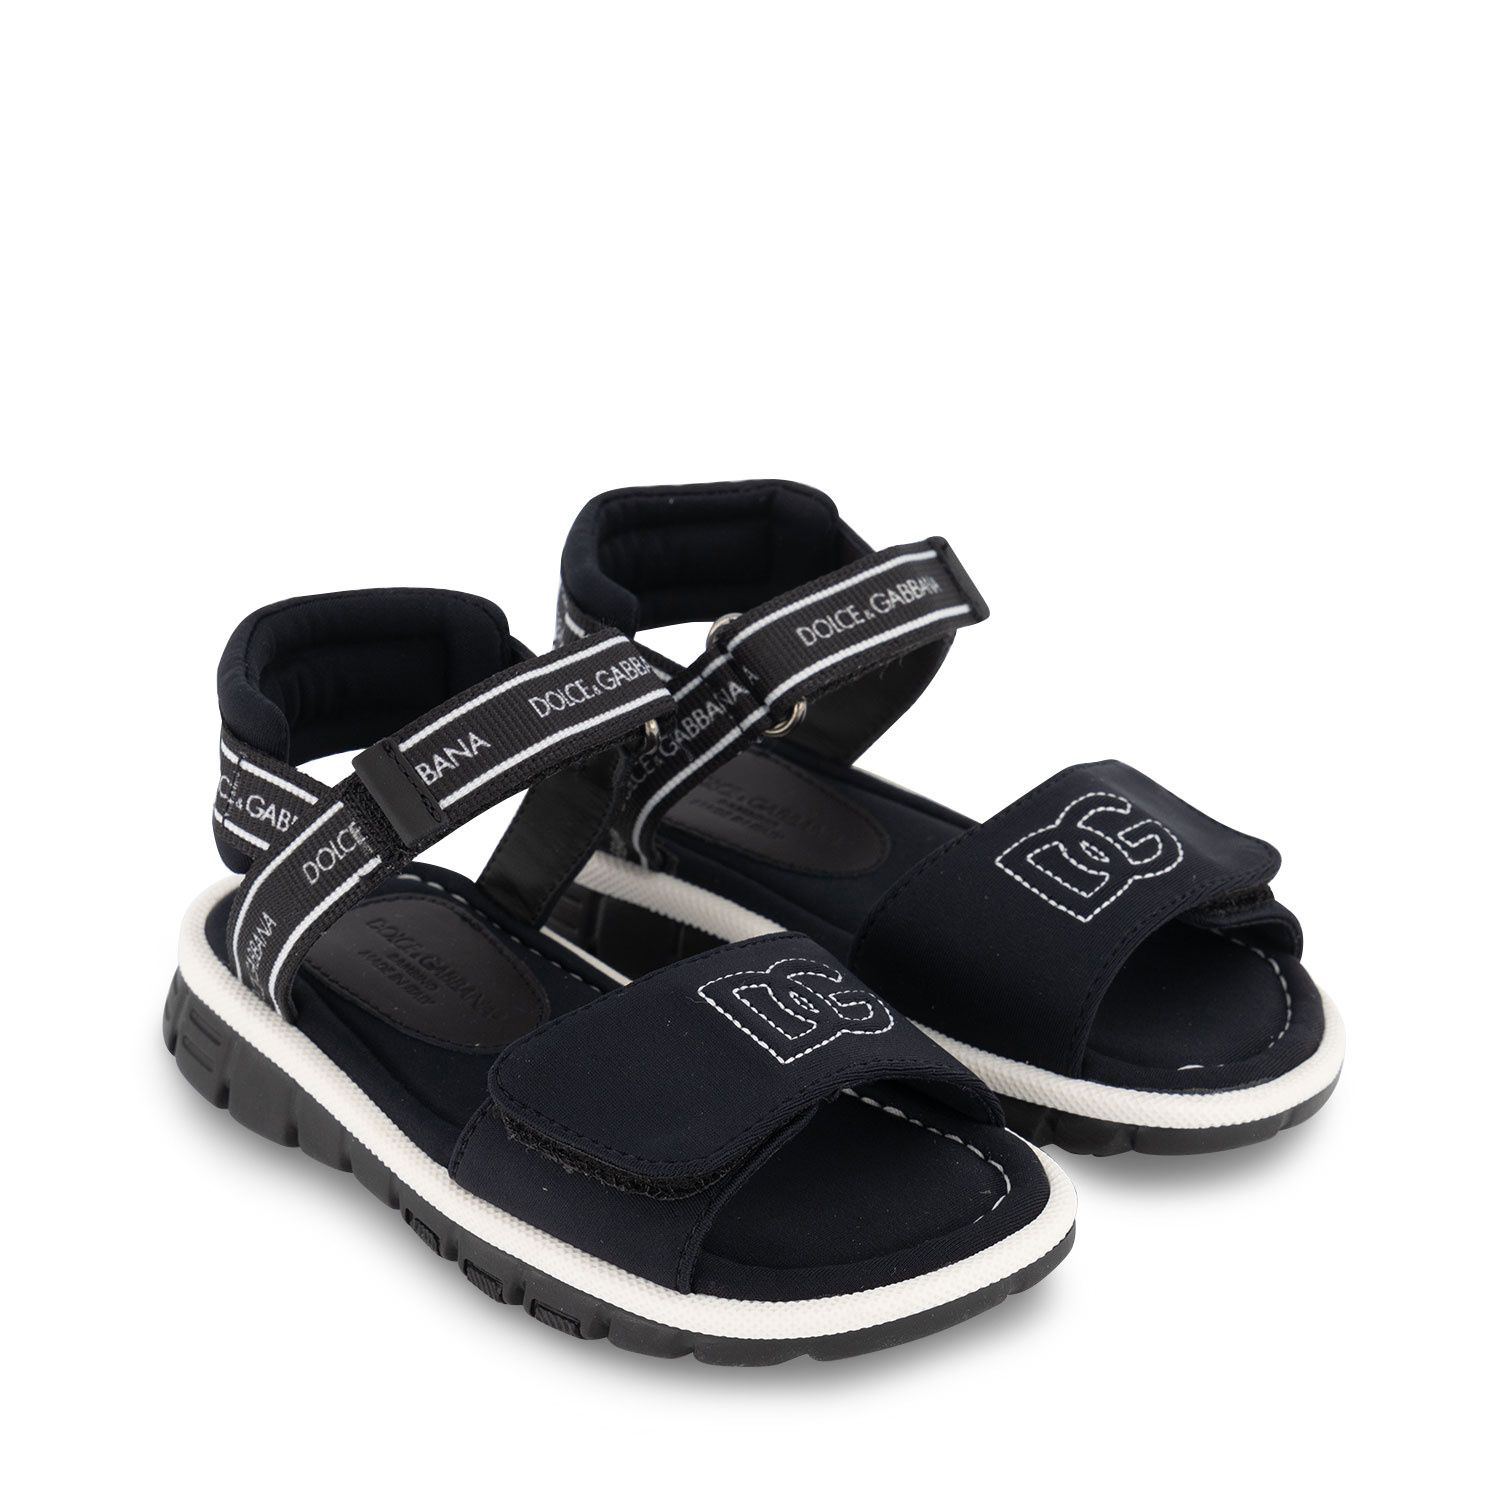 Picture of Dolce & Gabbana DL0068 AY233 kids sandals black